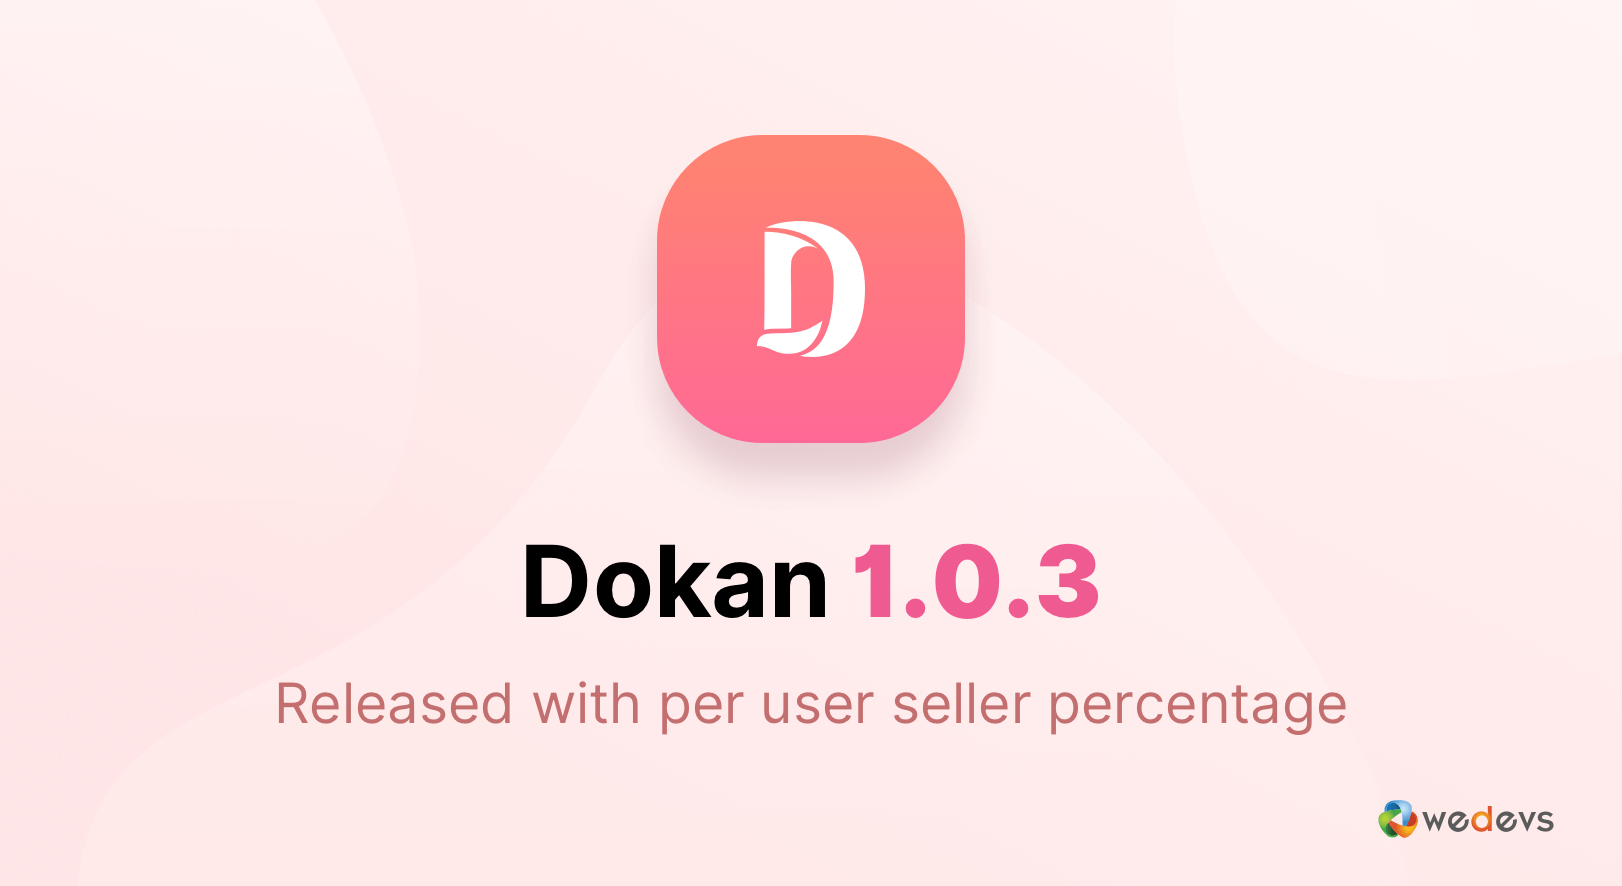 Dokan Product Updates- All Major Releases From v1.0 to v1.4